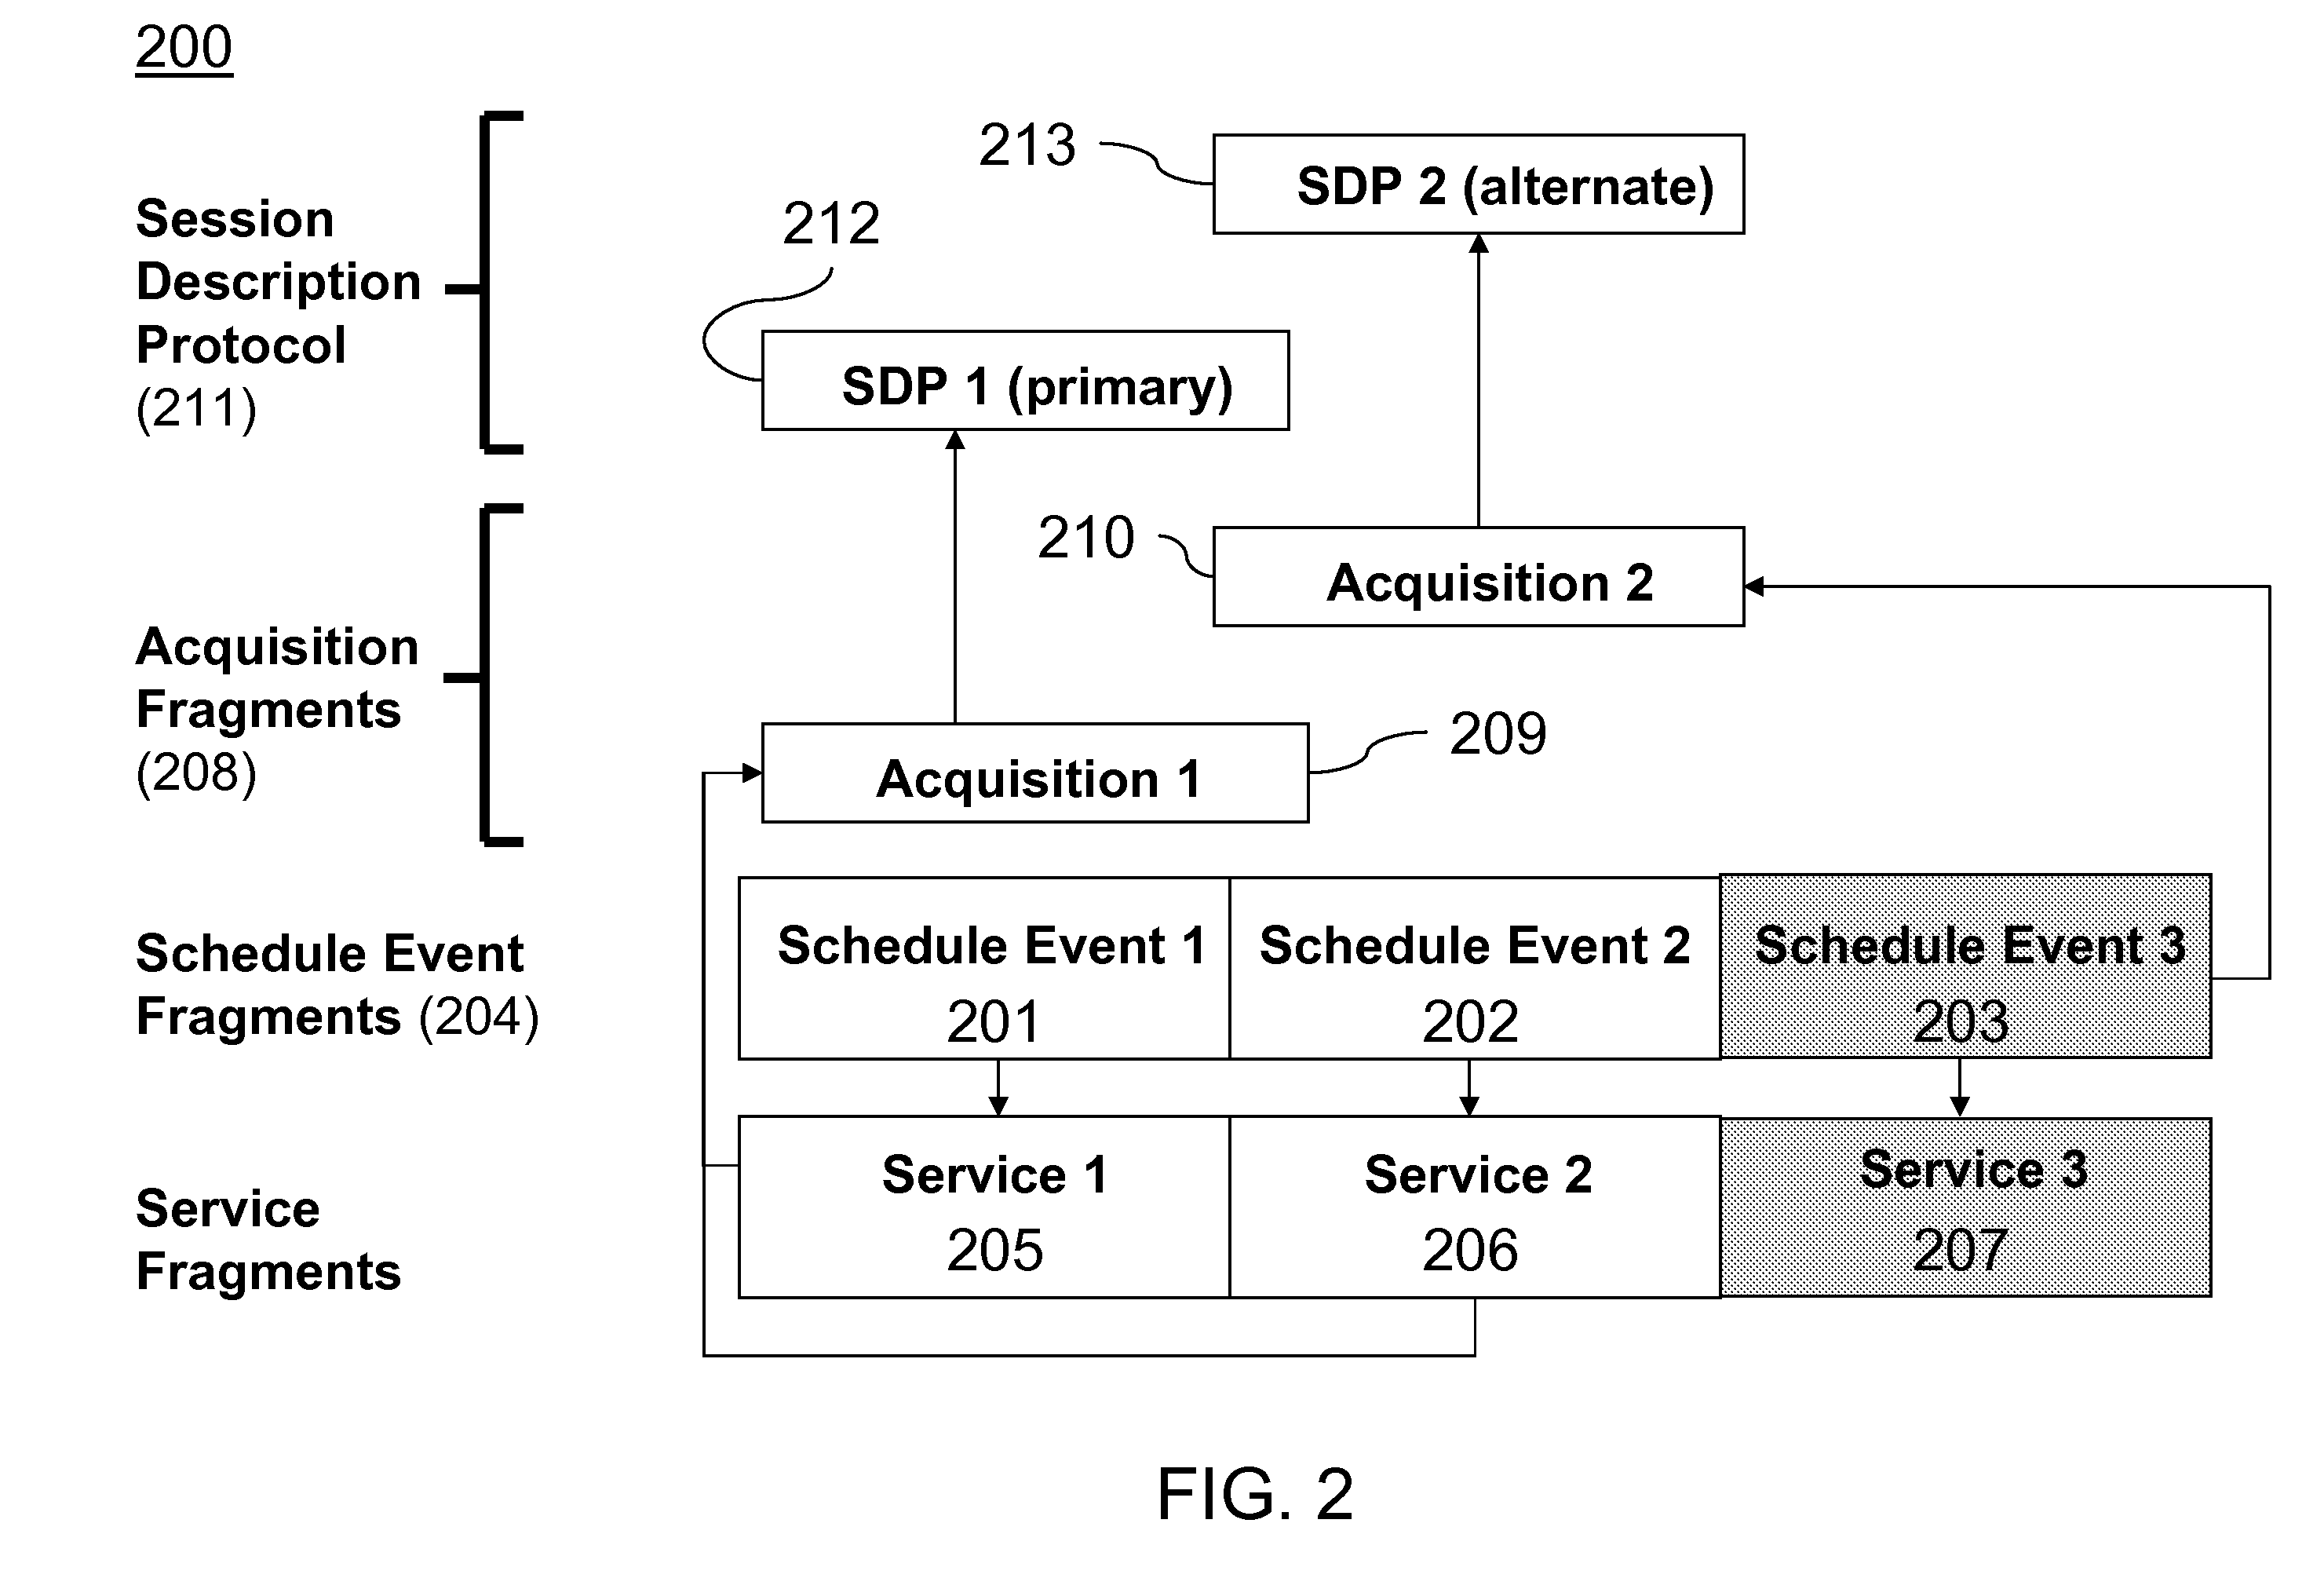 System and Method for Implementing Location-Based Content Restrictions in a Mobile Video Broadcast Environment